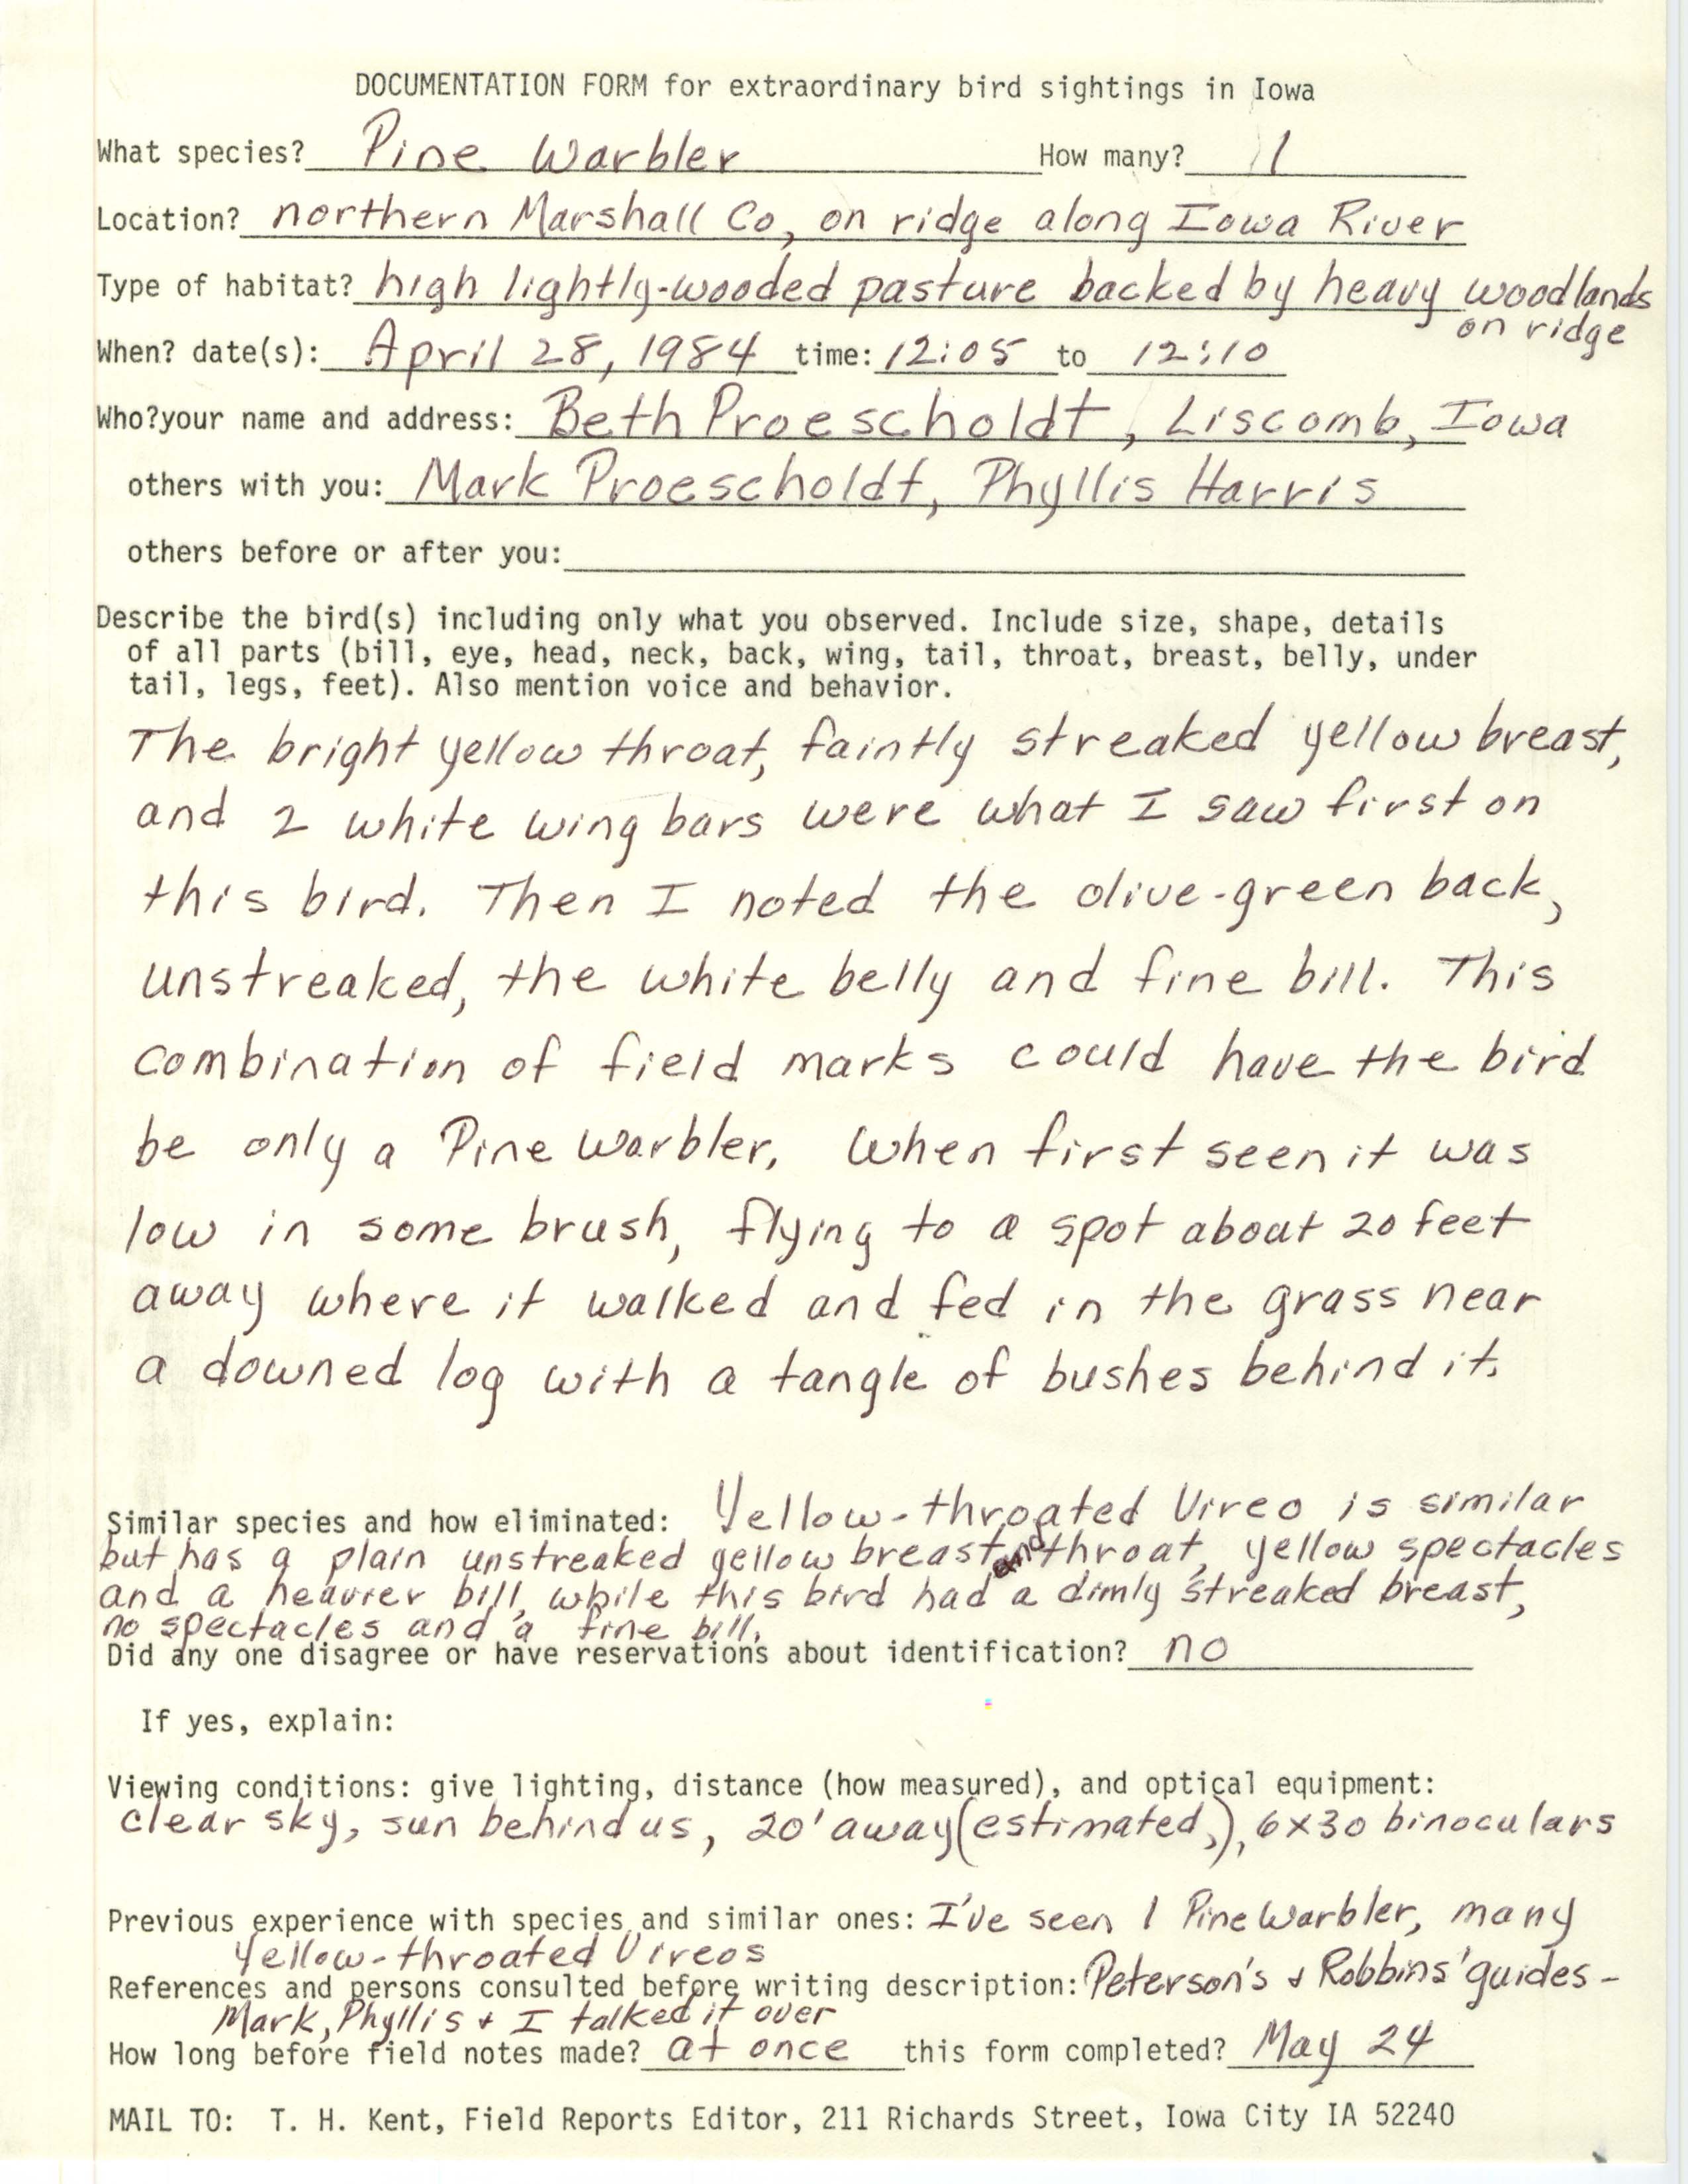 Rare bird documentation form for Pine Warbler in northern Marshall County, 1984